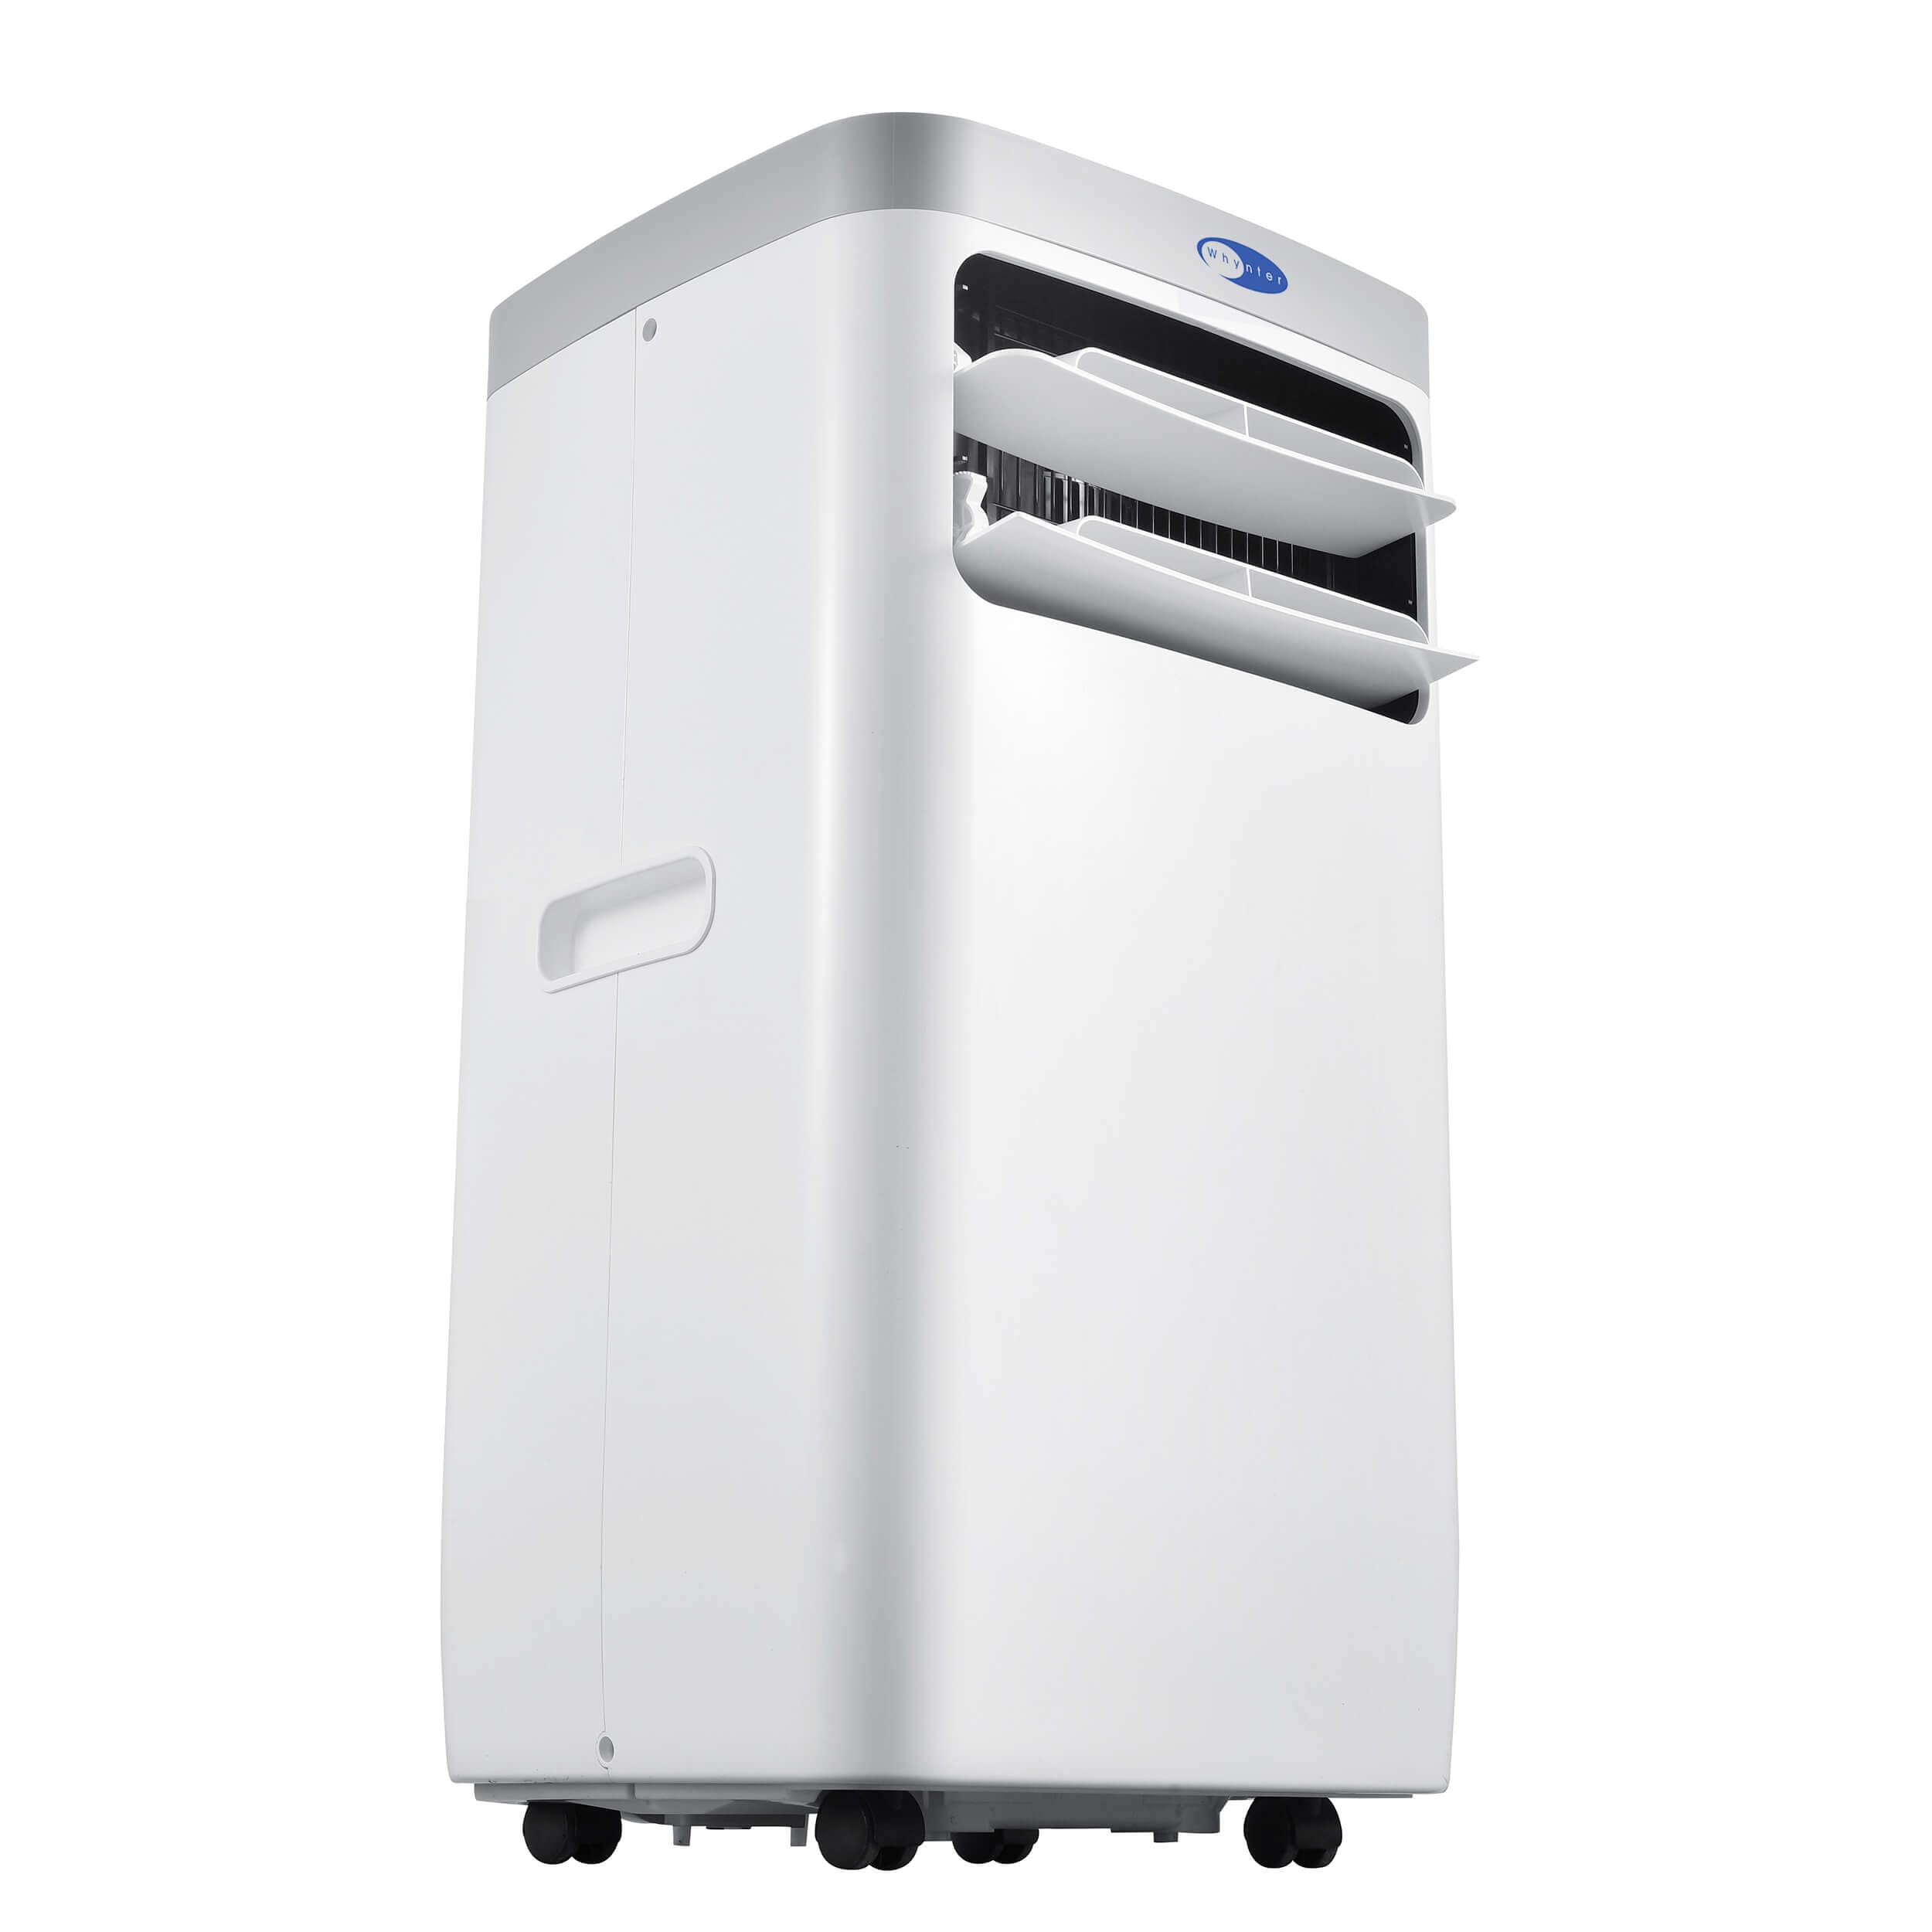 Whynter Whynter ARC-115WG 11,000 BTU (6,800 BTU SACC) Compact Portable Air Conditioner, Dehumidifier, and Fan with Remote Control, up to 400 sq ft in White/Grey